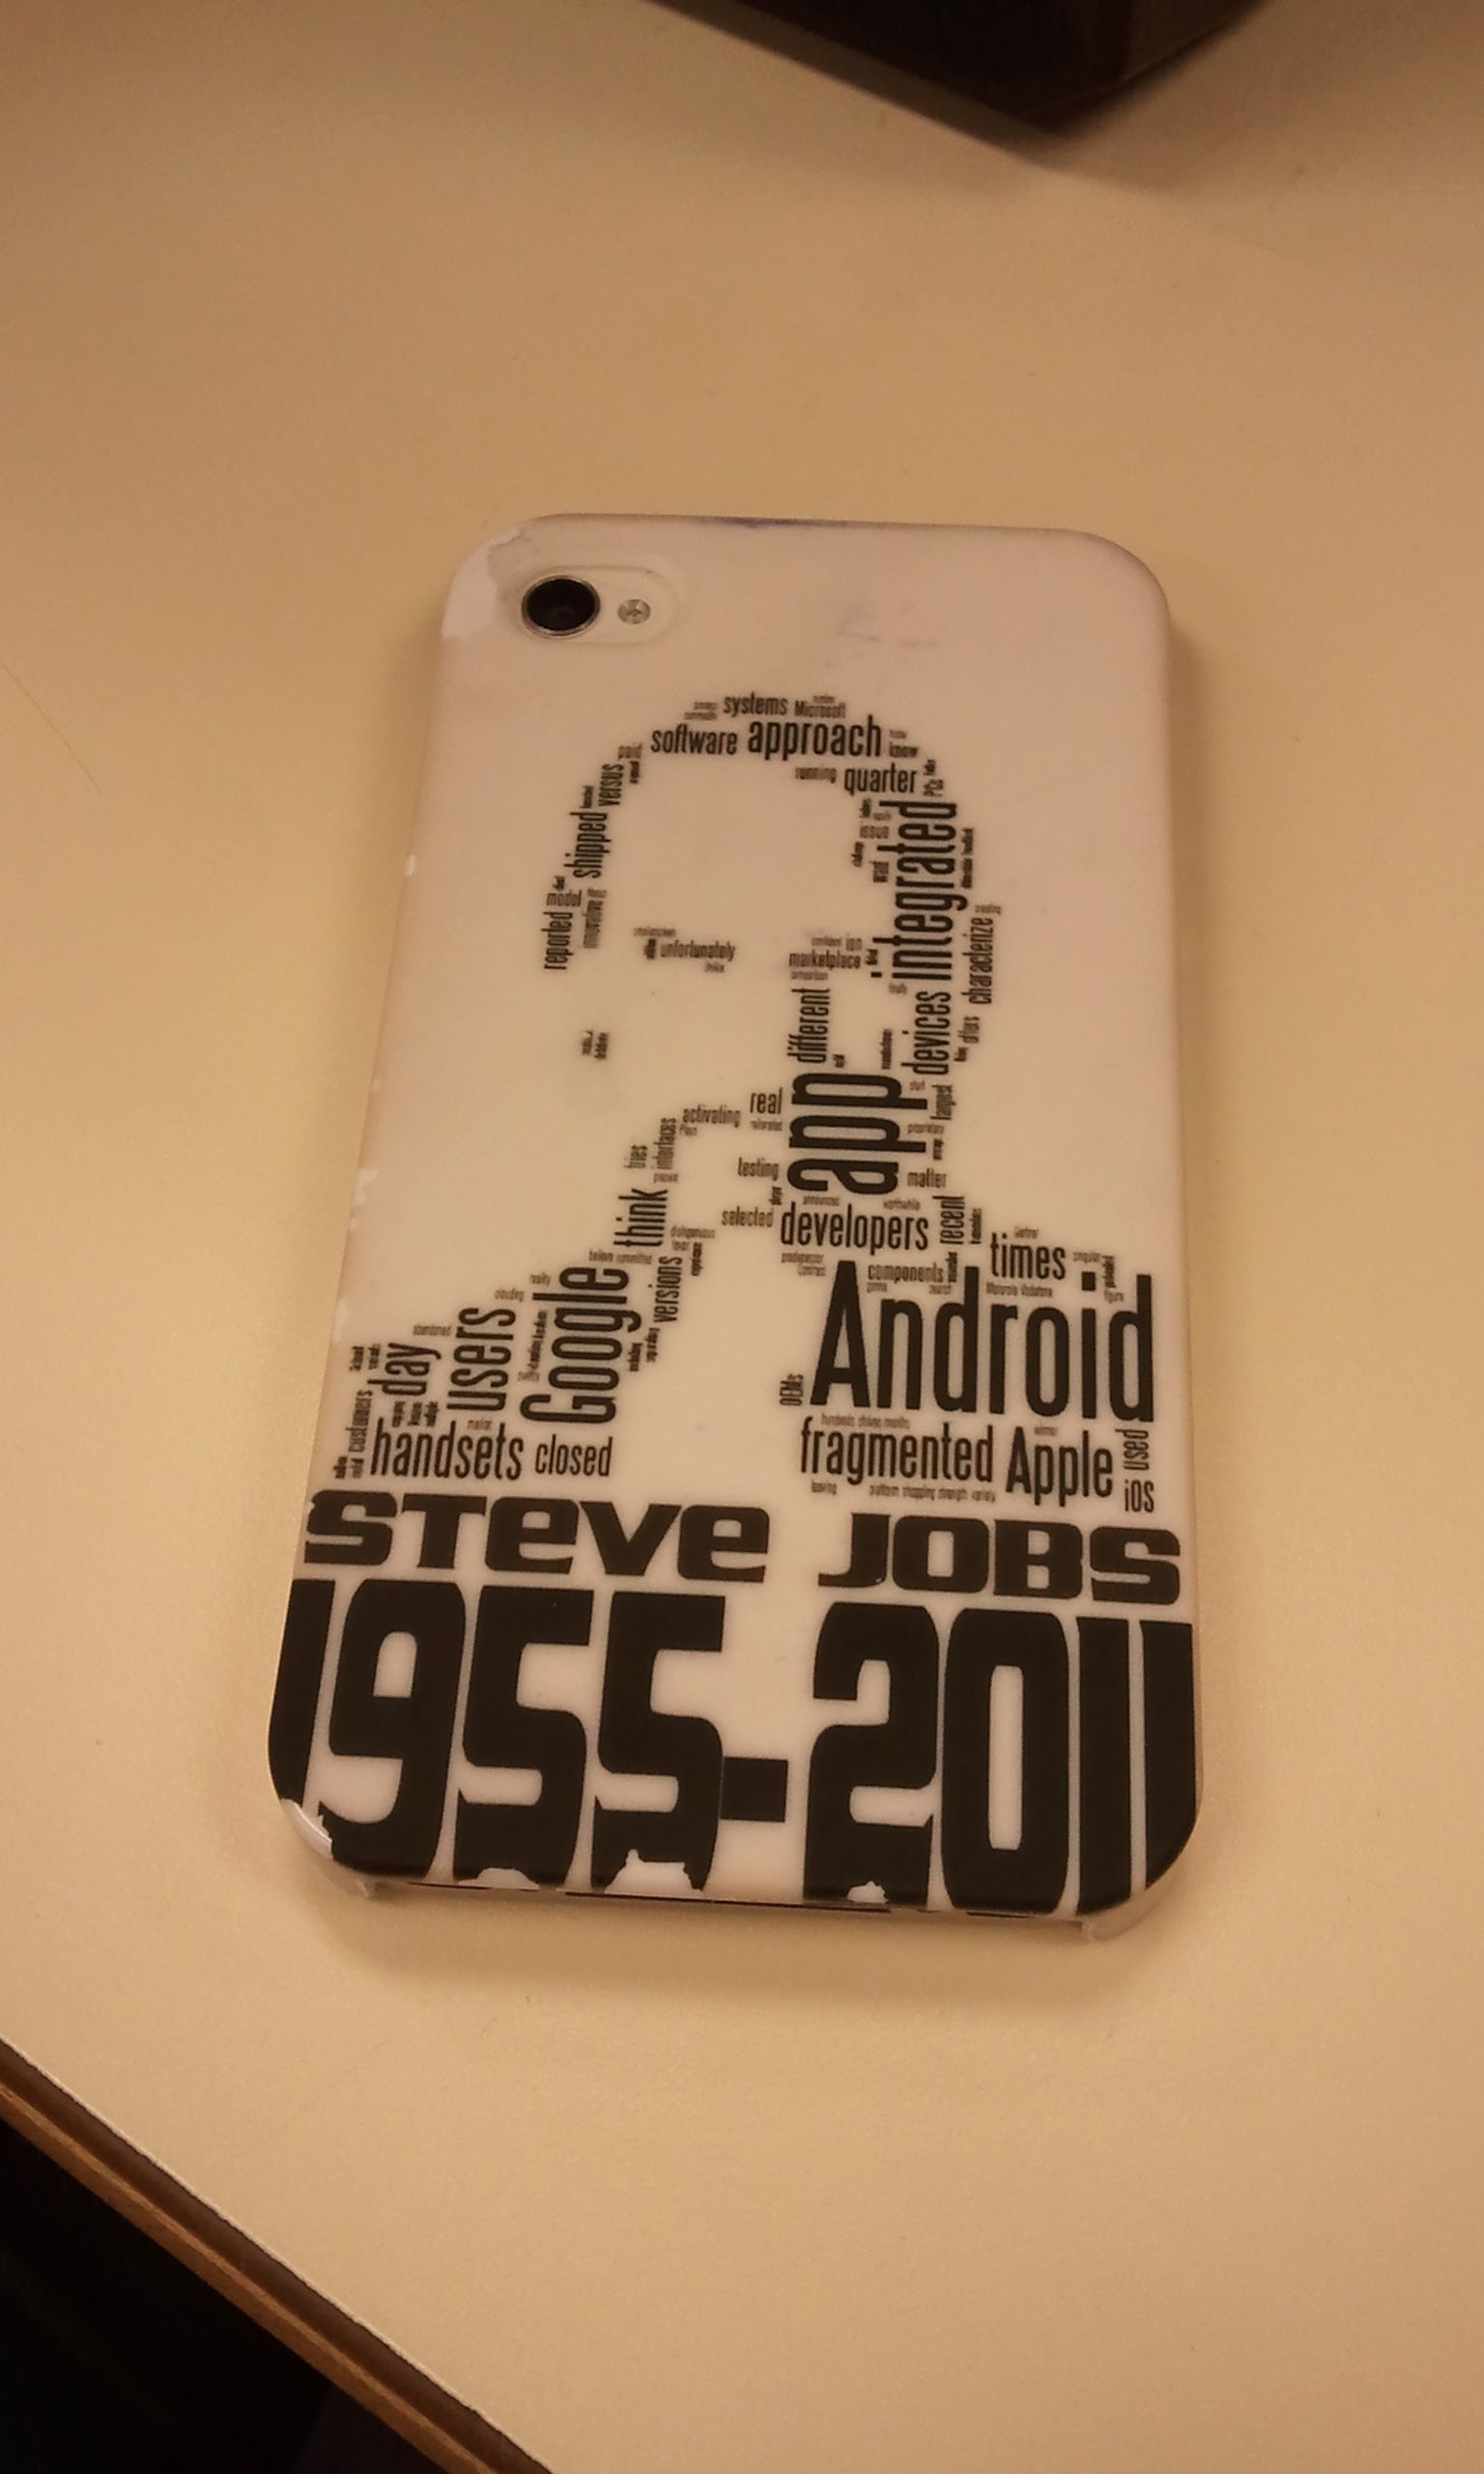 The biggest word on this Steve Jobs iPhone case is Android